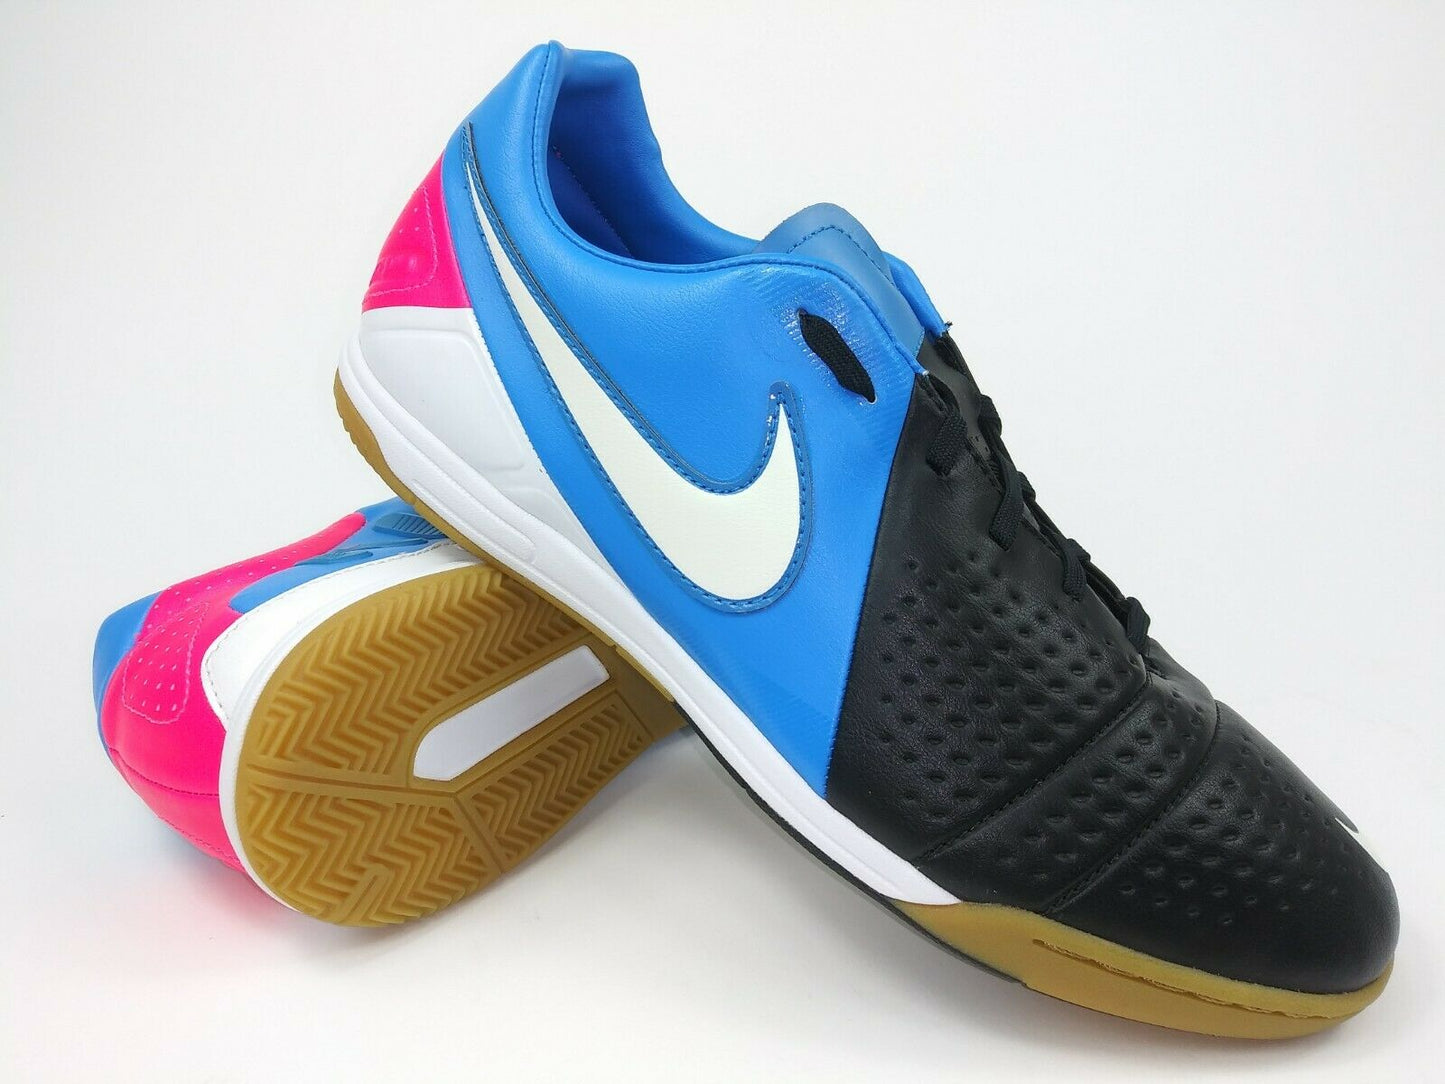 Nike CTR 360 Libretto lll IC Black Blue Indoor Shoes